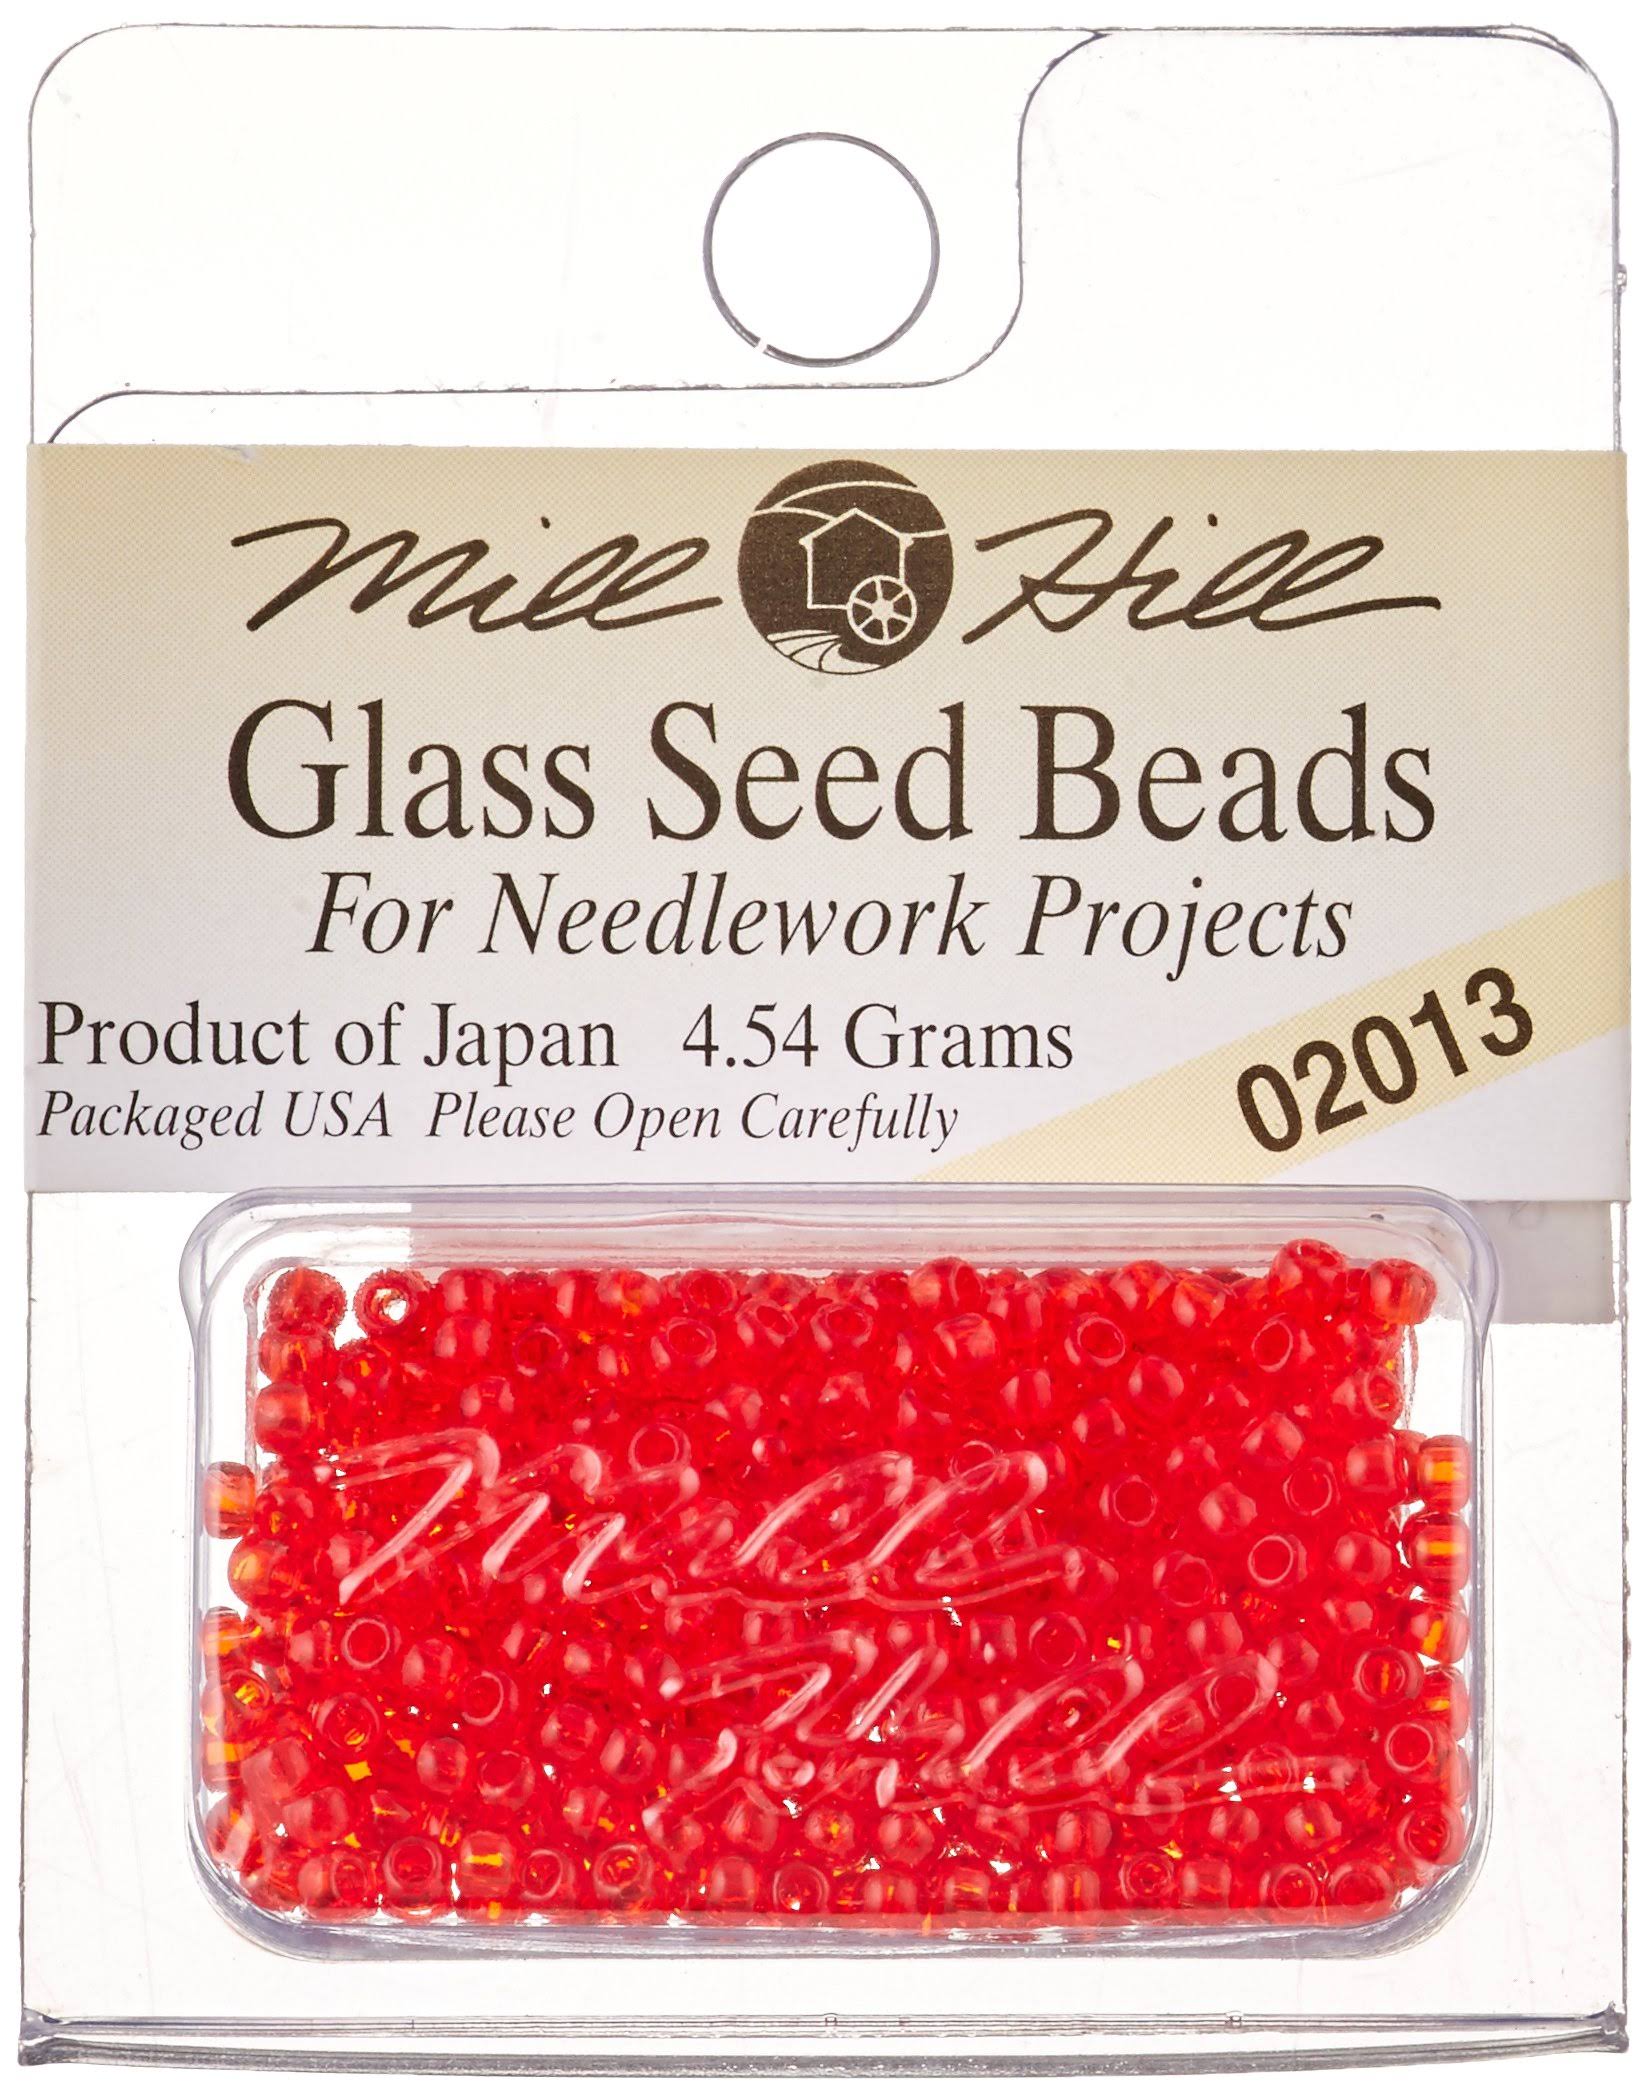 Mill Hill Glass Seed Beads / 02013 Red